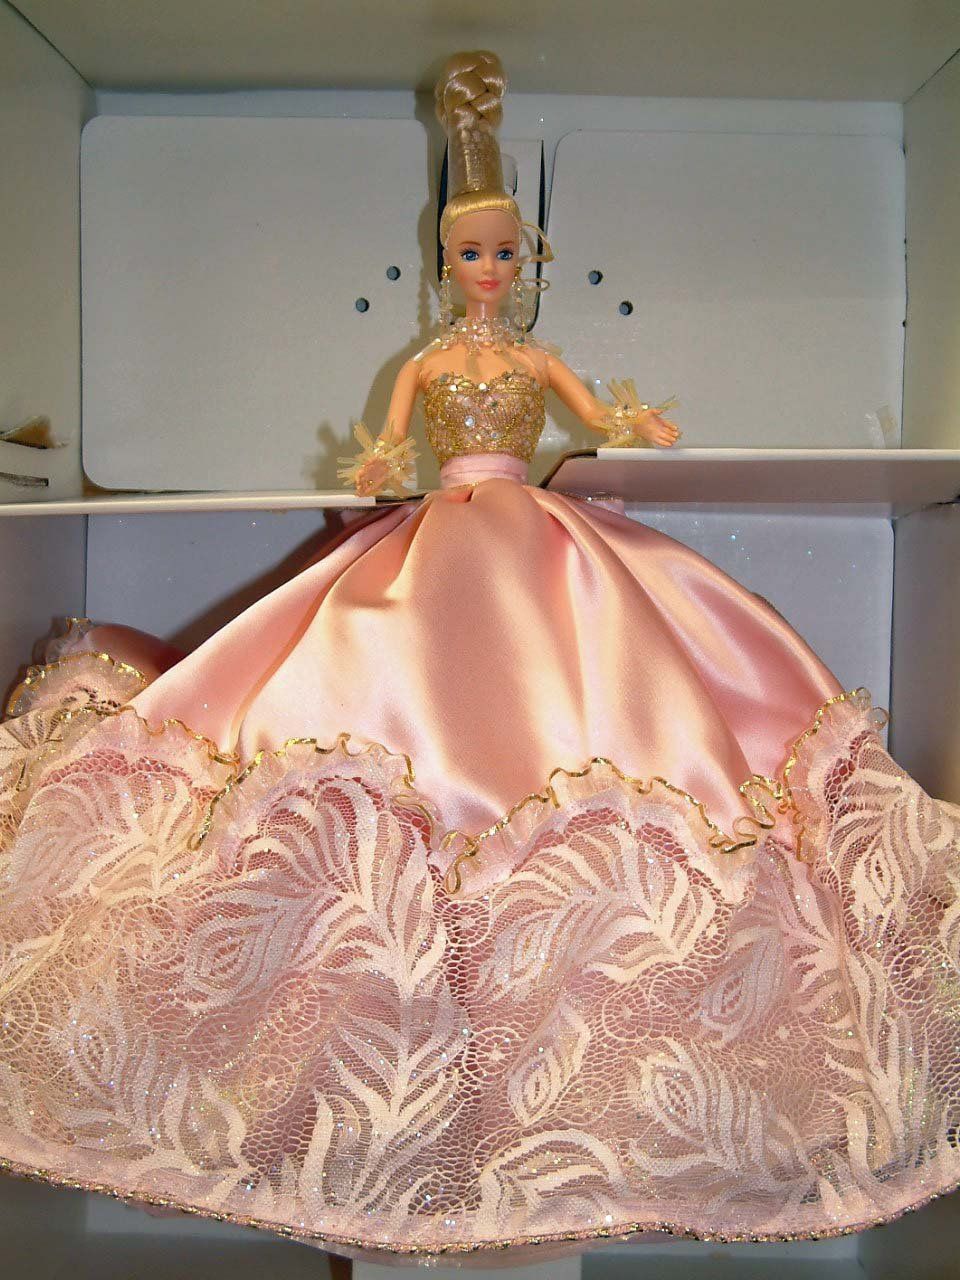 The 9 Most Barbie Dolls of All Time